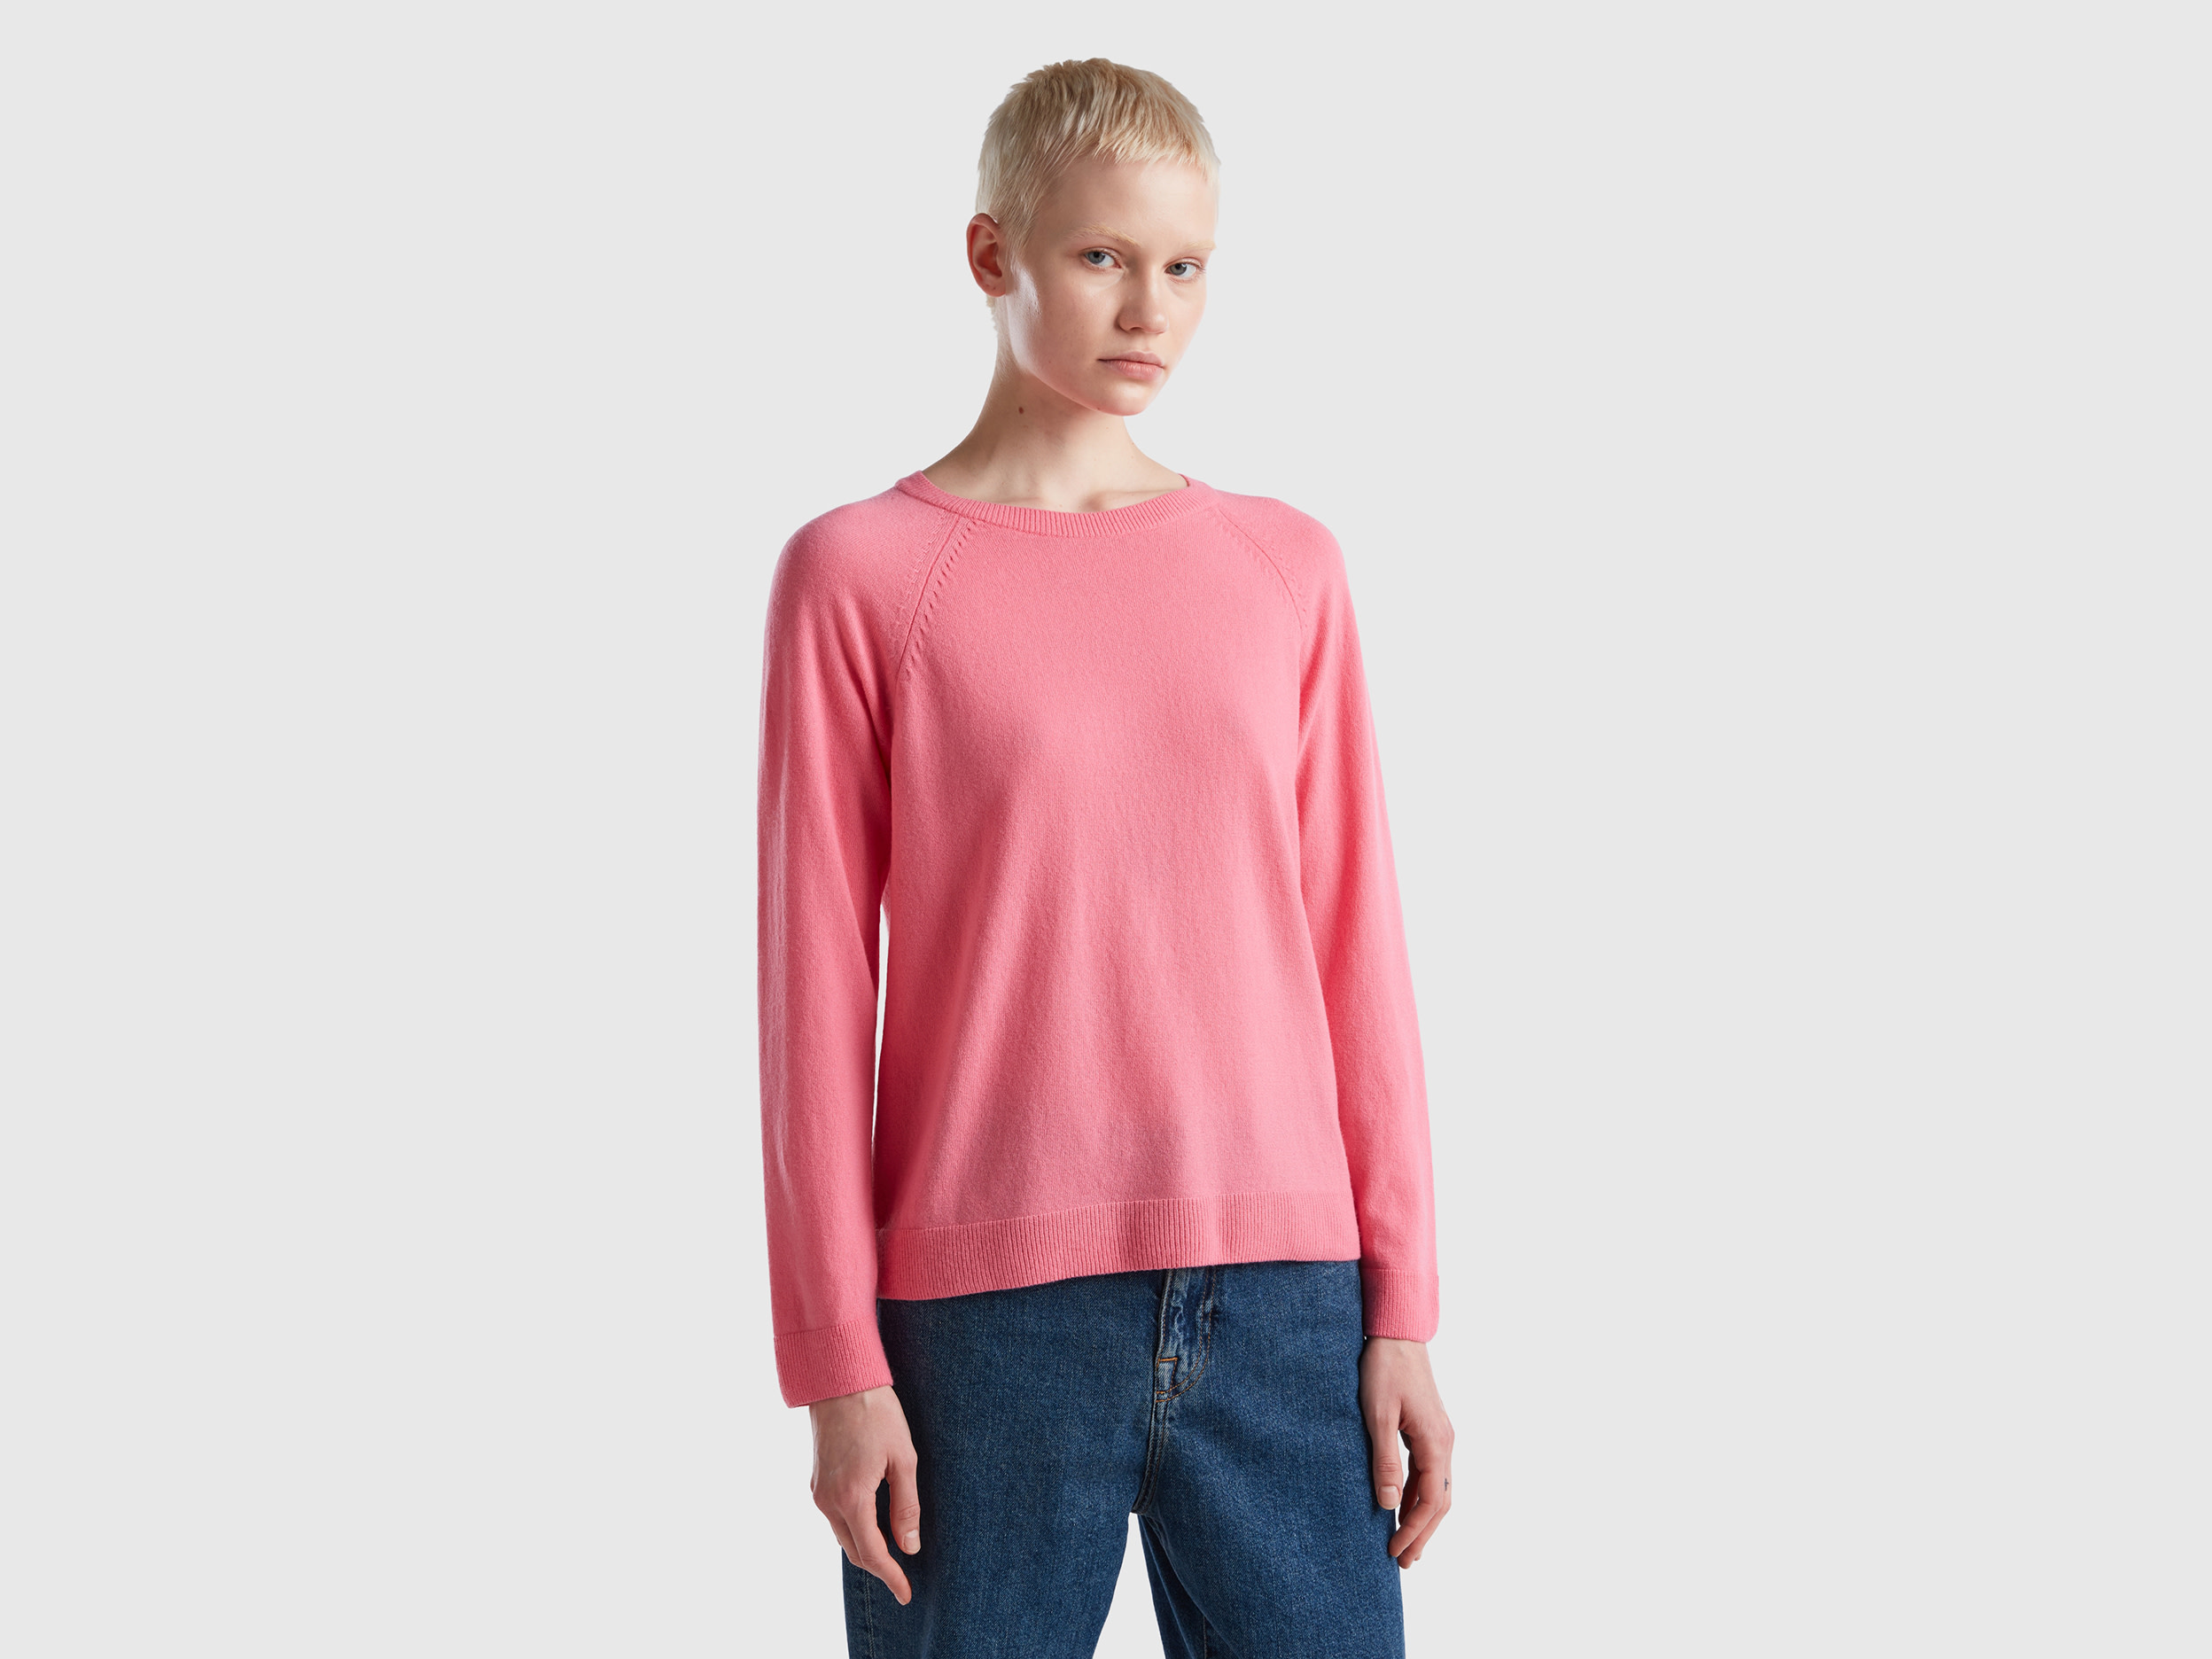 Benetton, Pink Crew Neck Sweater In Cashmere And Wool Blend, size XS, Pink, Women